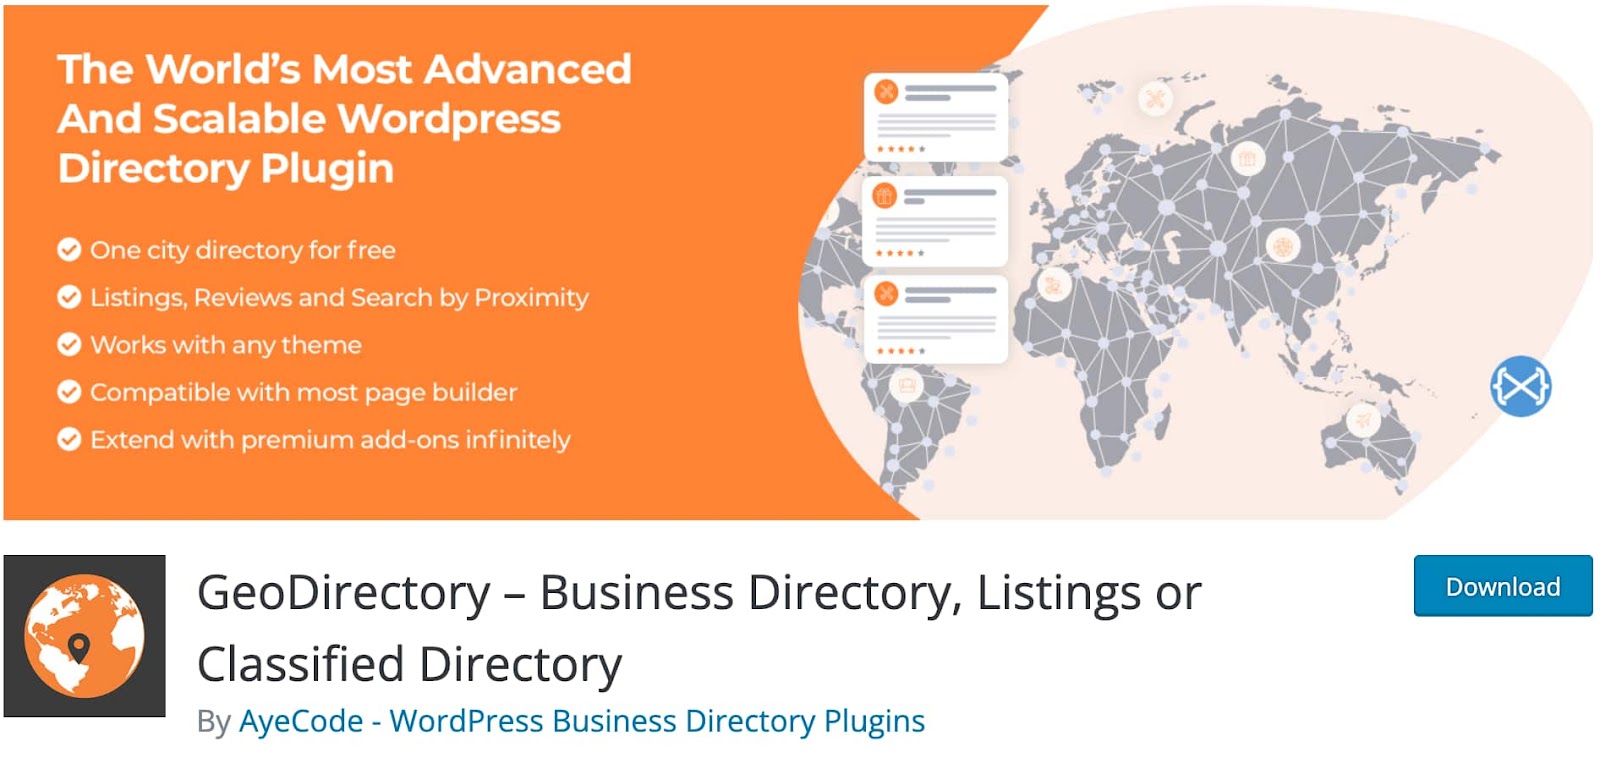 GeoDirectory Business Directory download screen